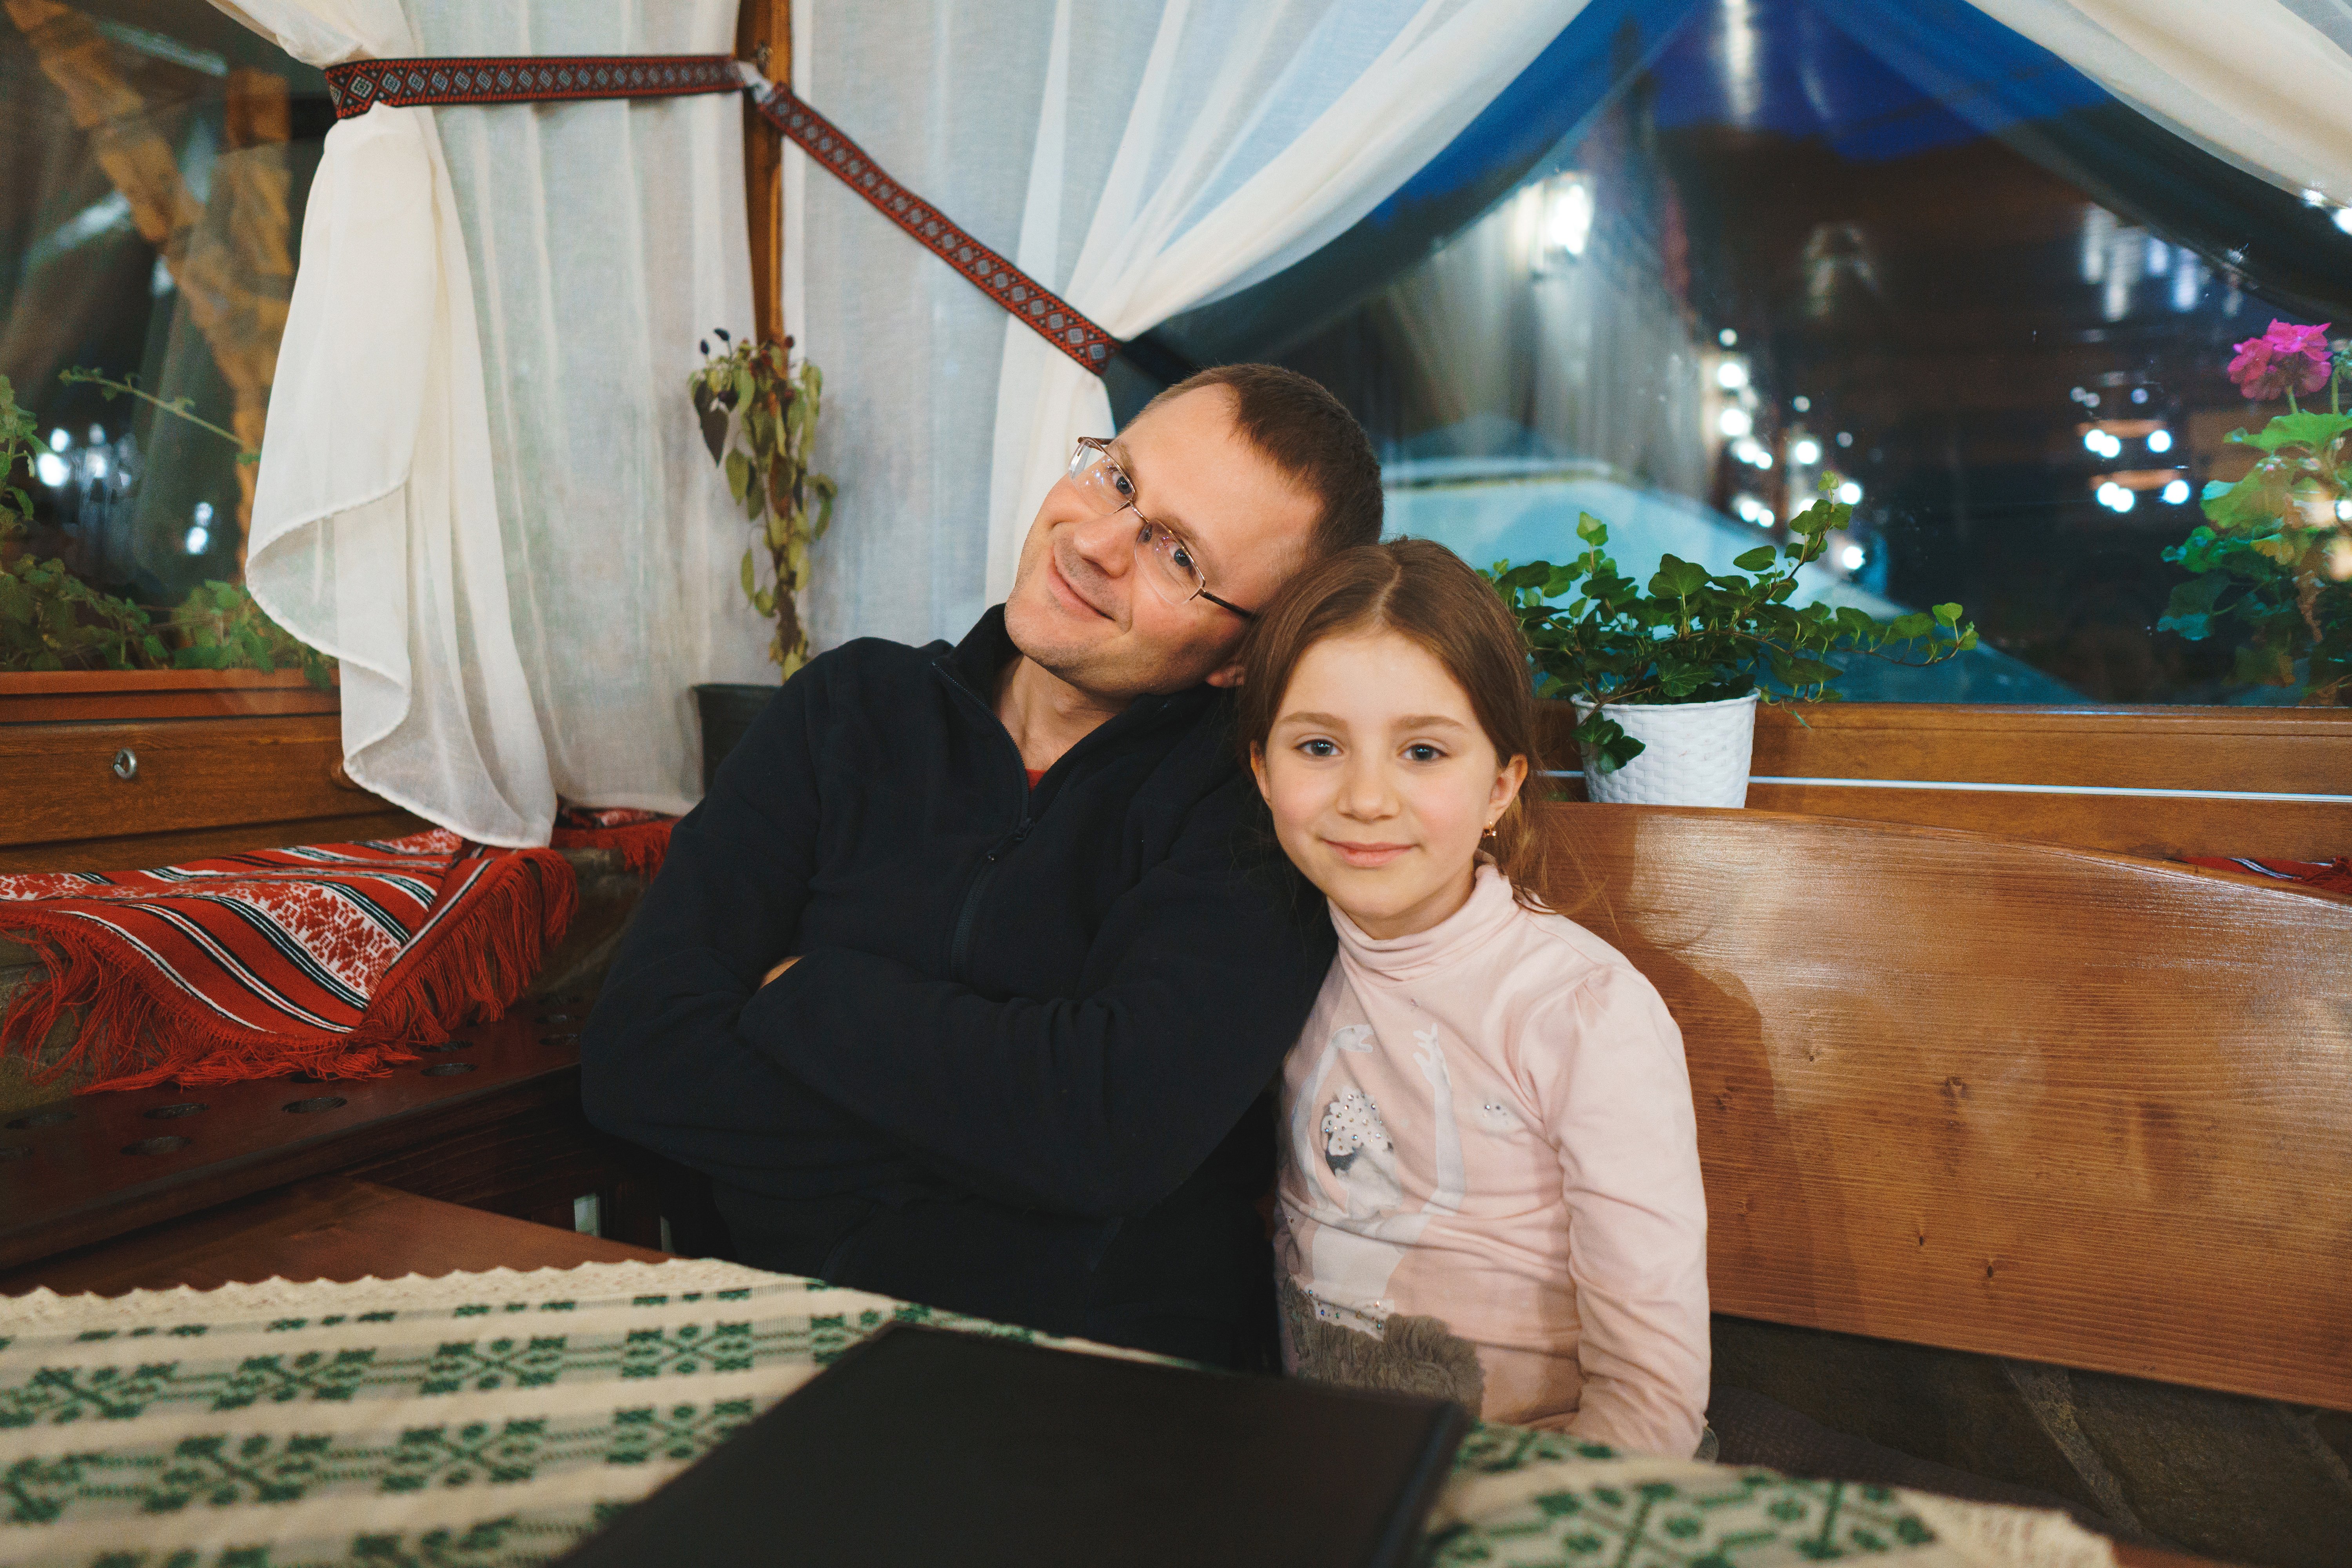 A little girl and her father sit together. | Source: Shutterstock